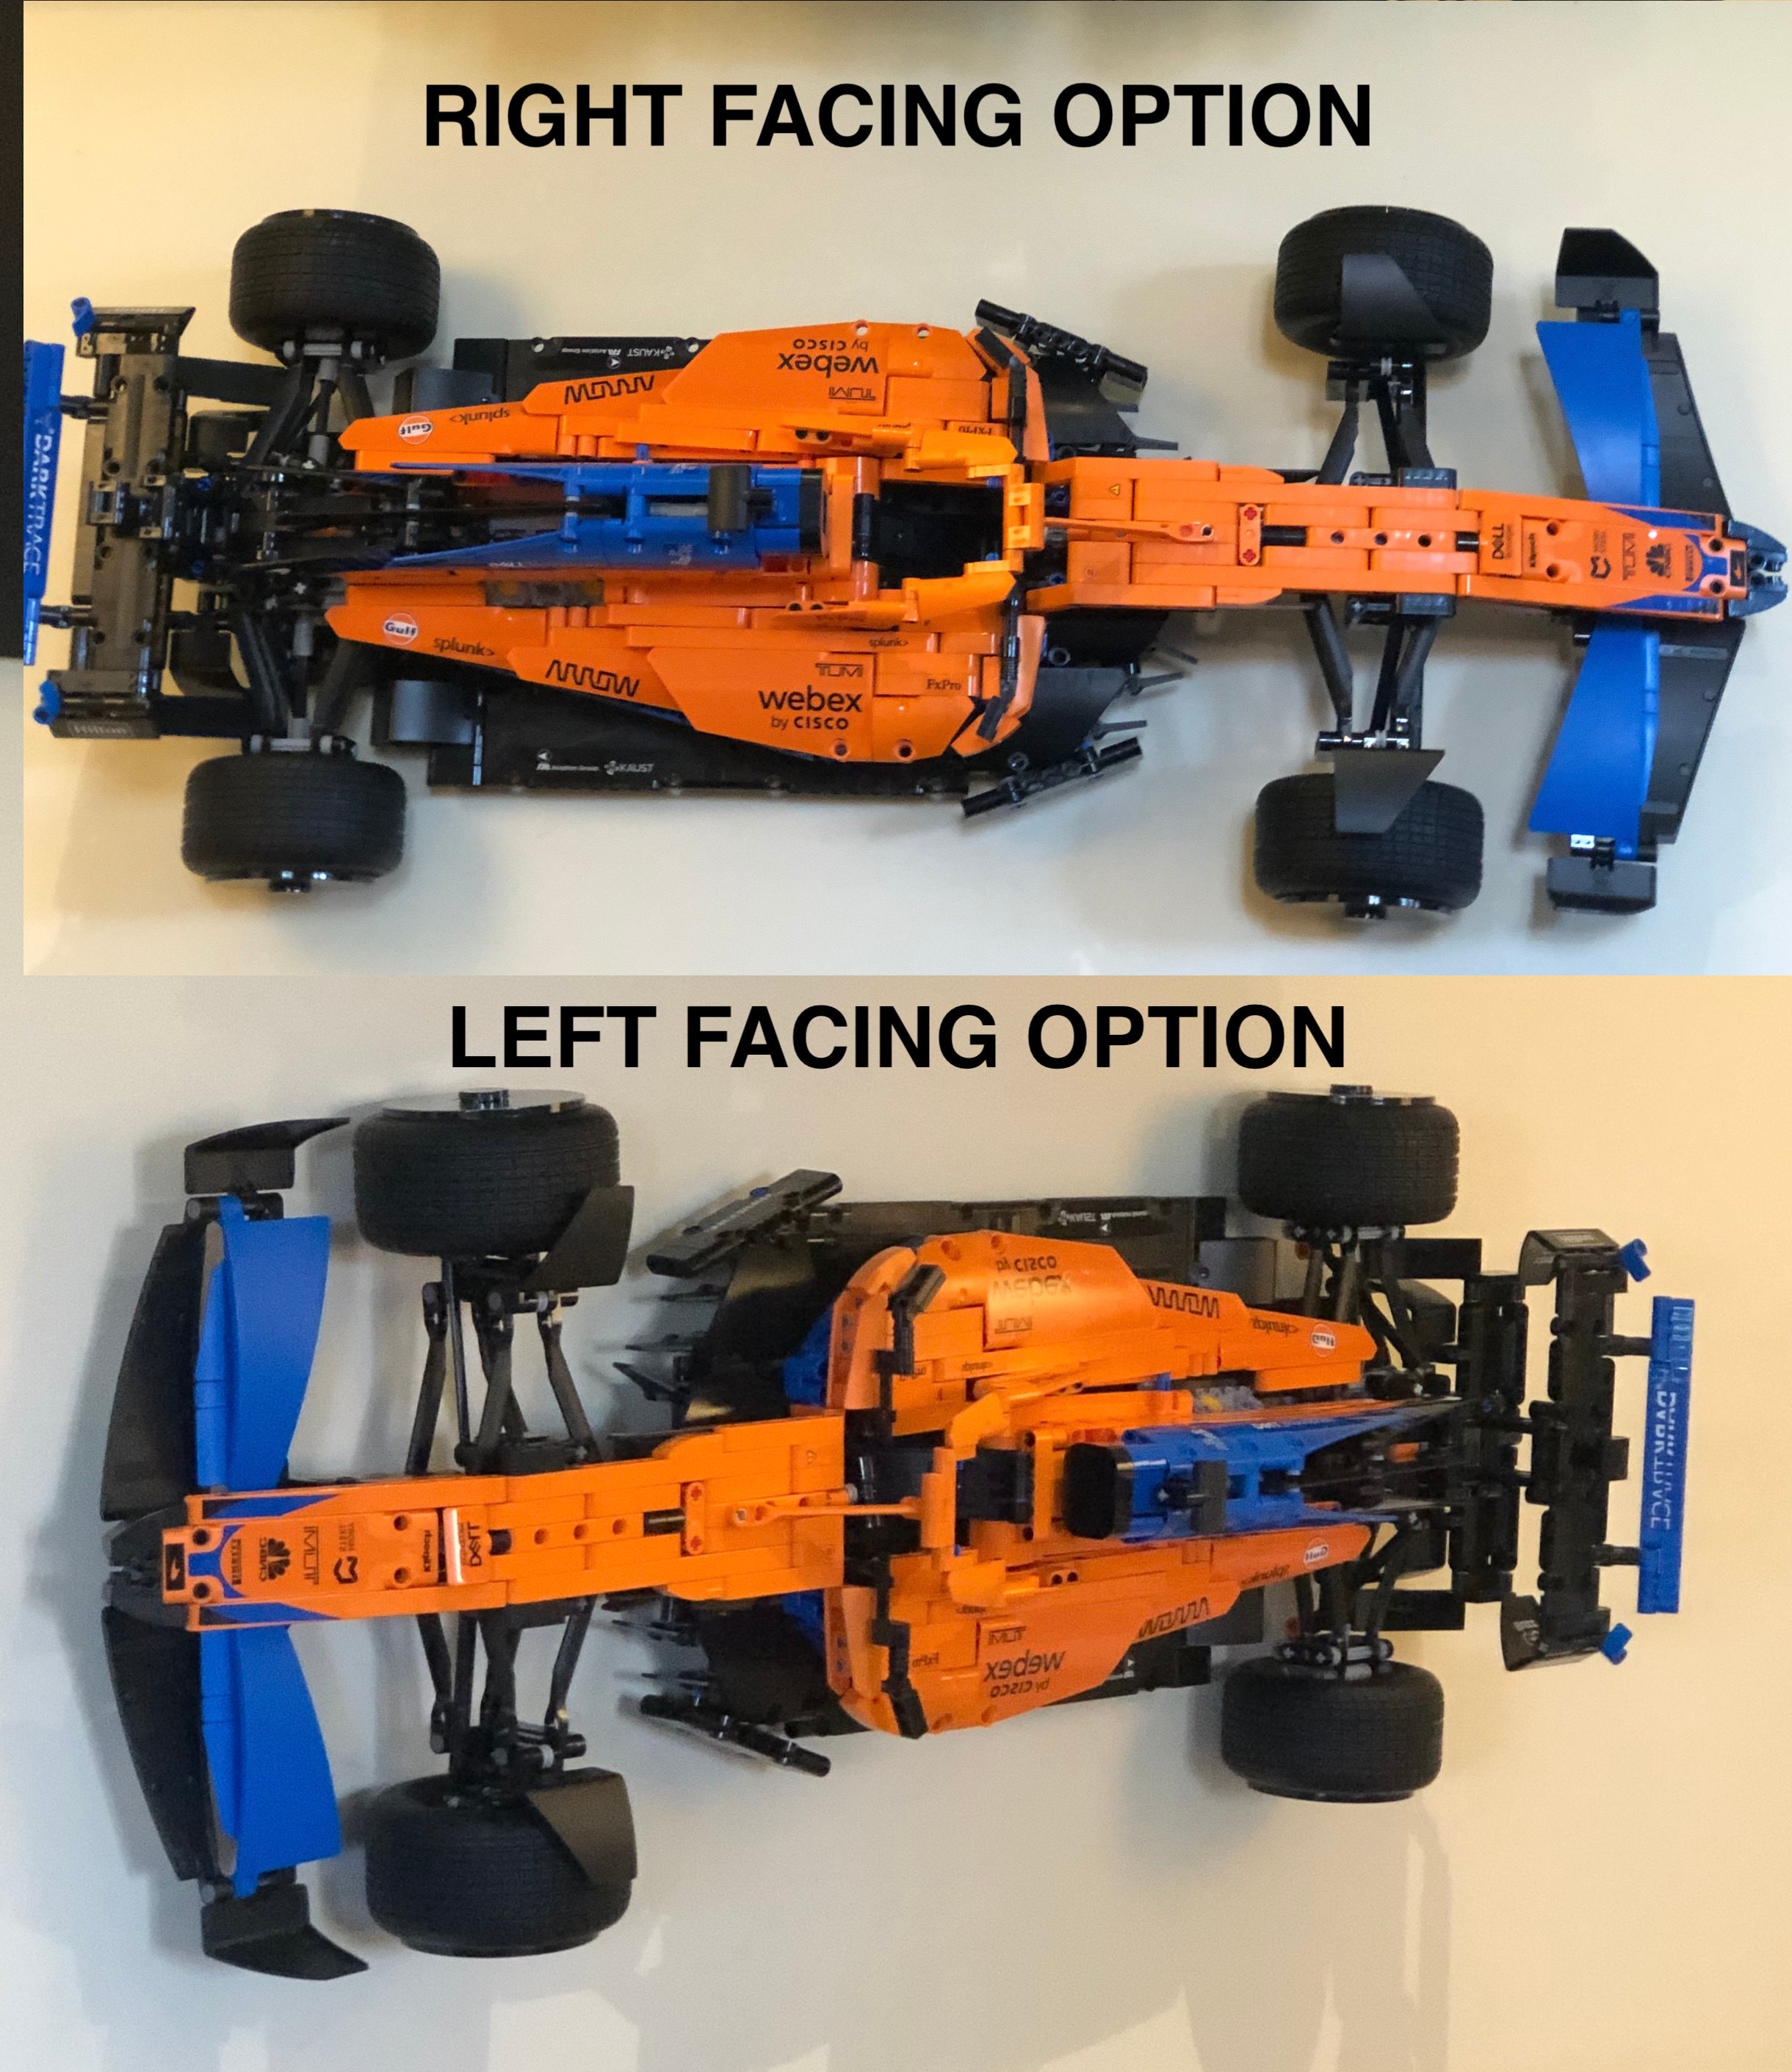 Wall Mount Stand for LEGO Technic McLaren F1 Formula 1 Race Car 42141  Display